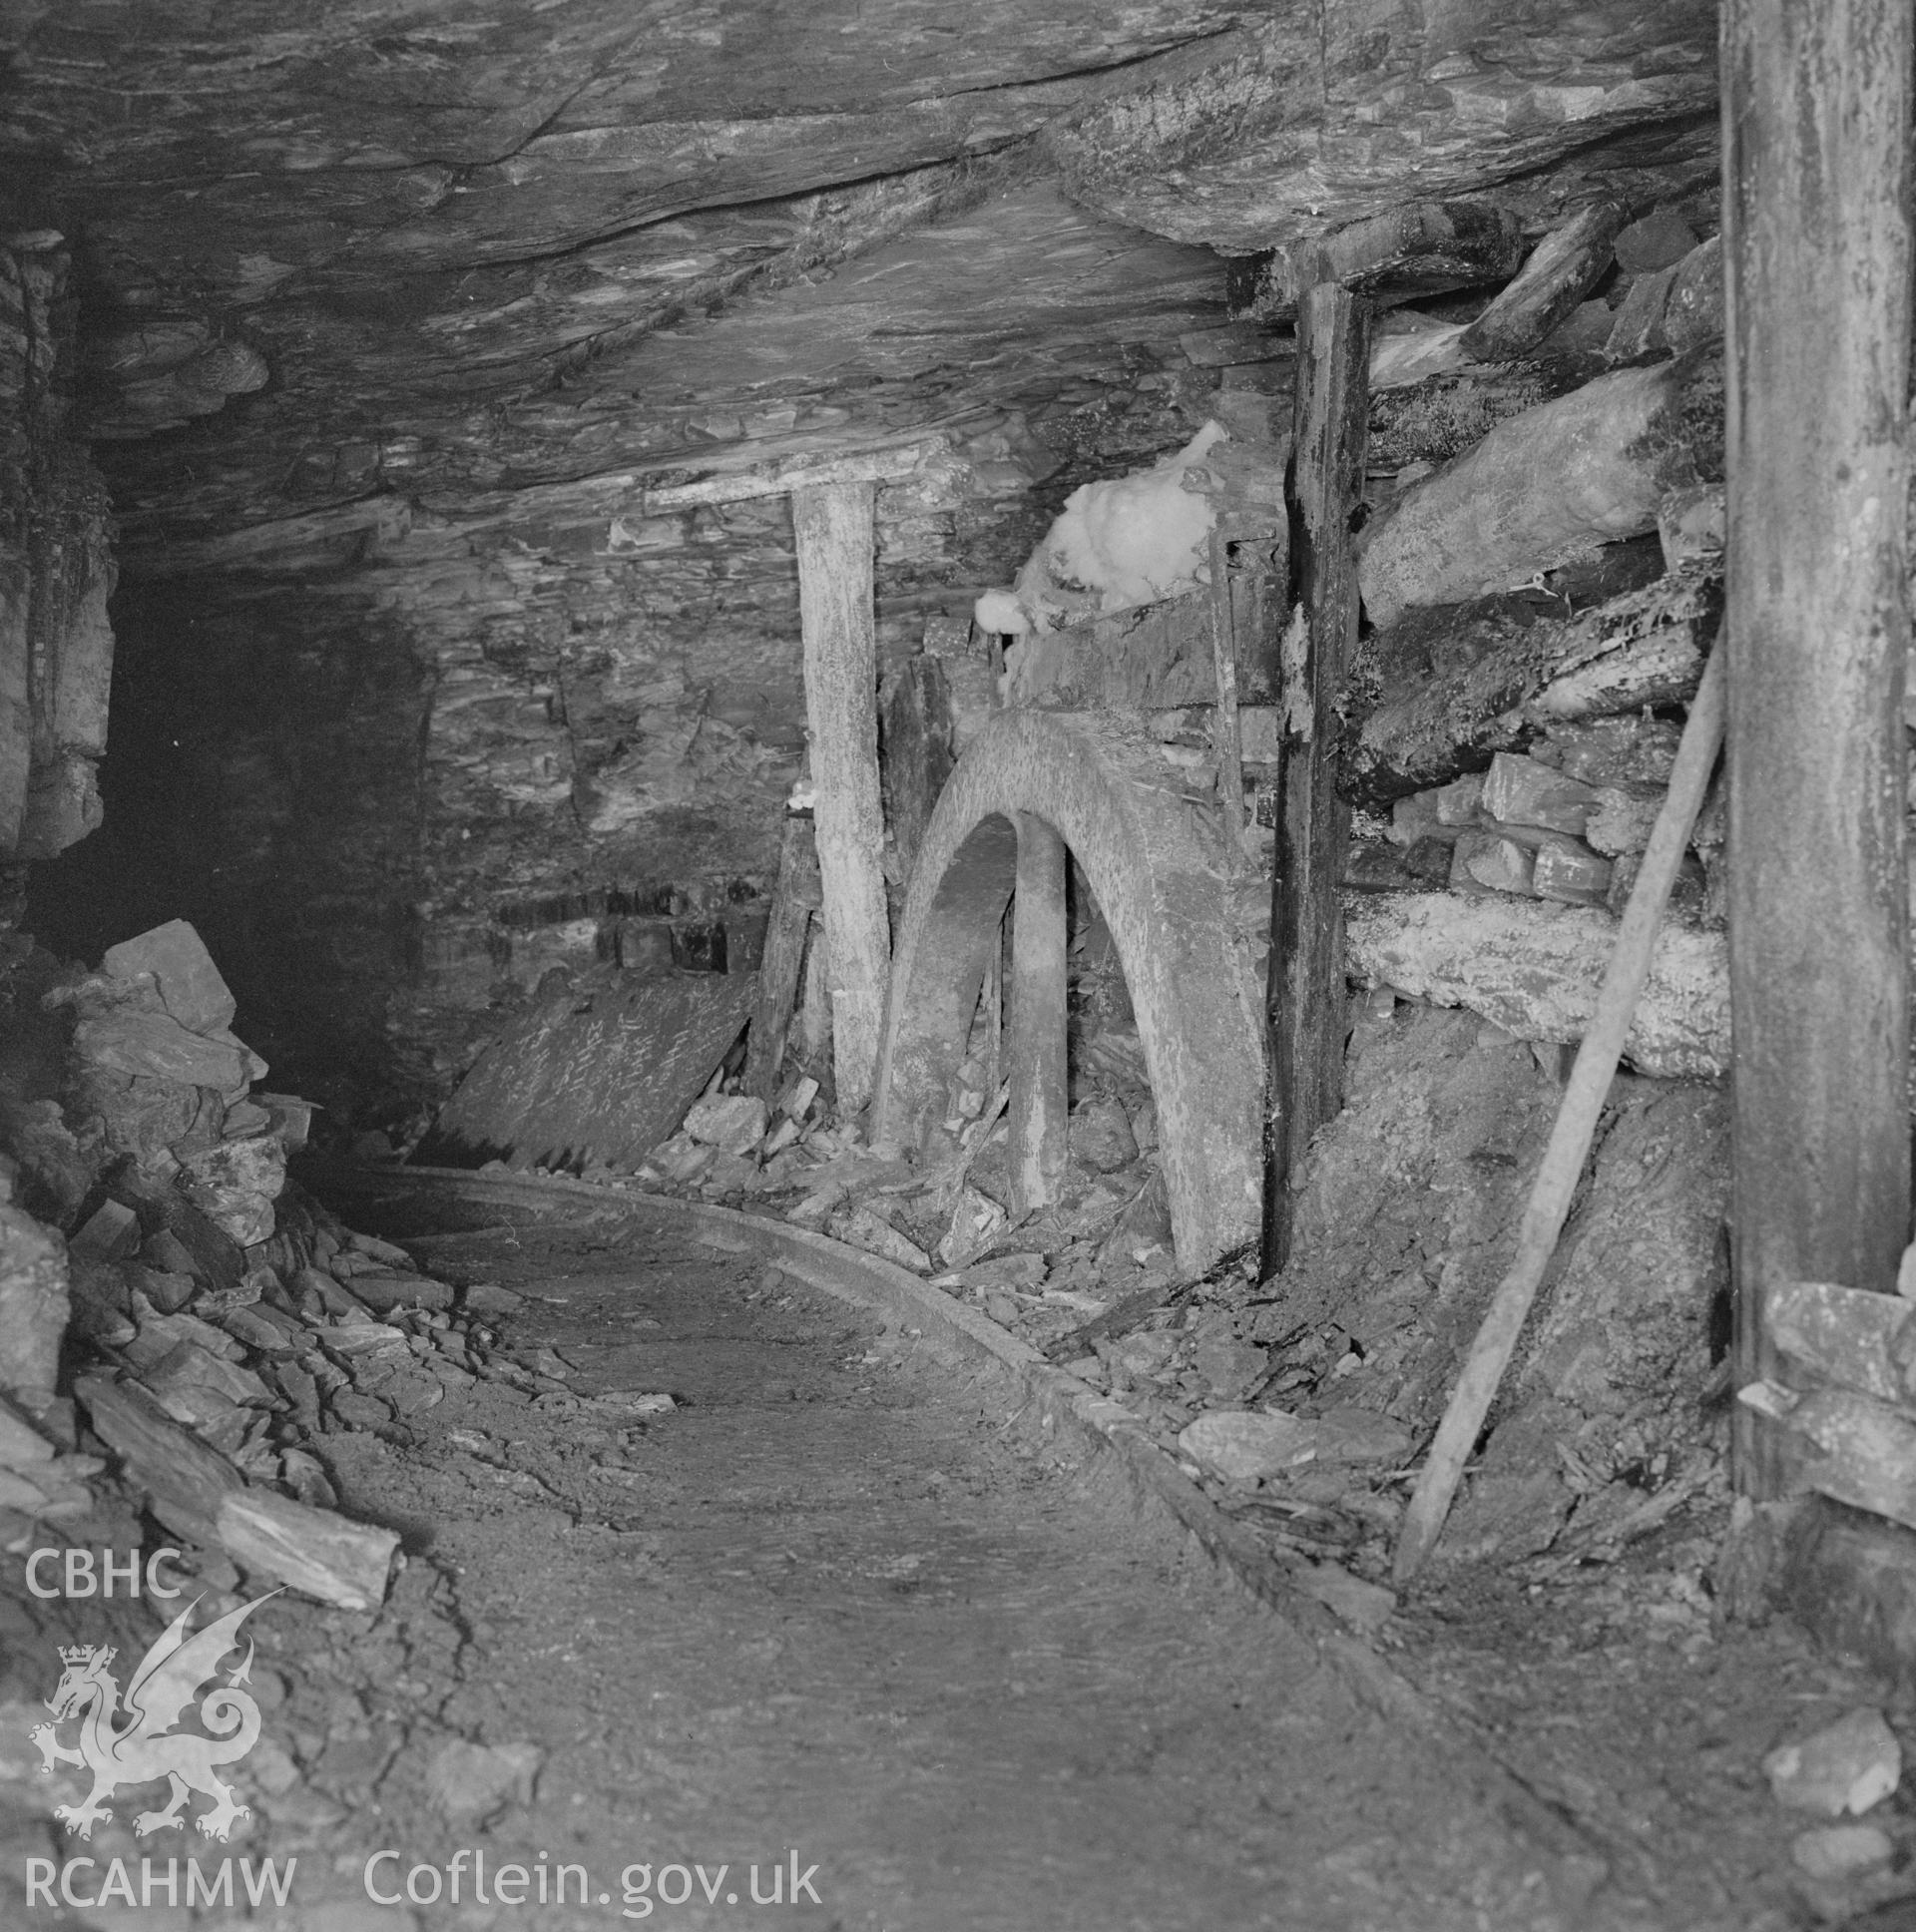 Digital copy of an acetate negative showing engine pit Level at Big Pit - old fly wheel used in pack,  from the John Cornwell Collection.